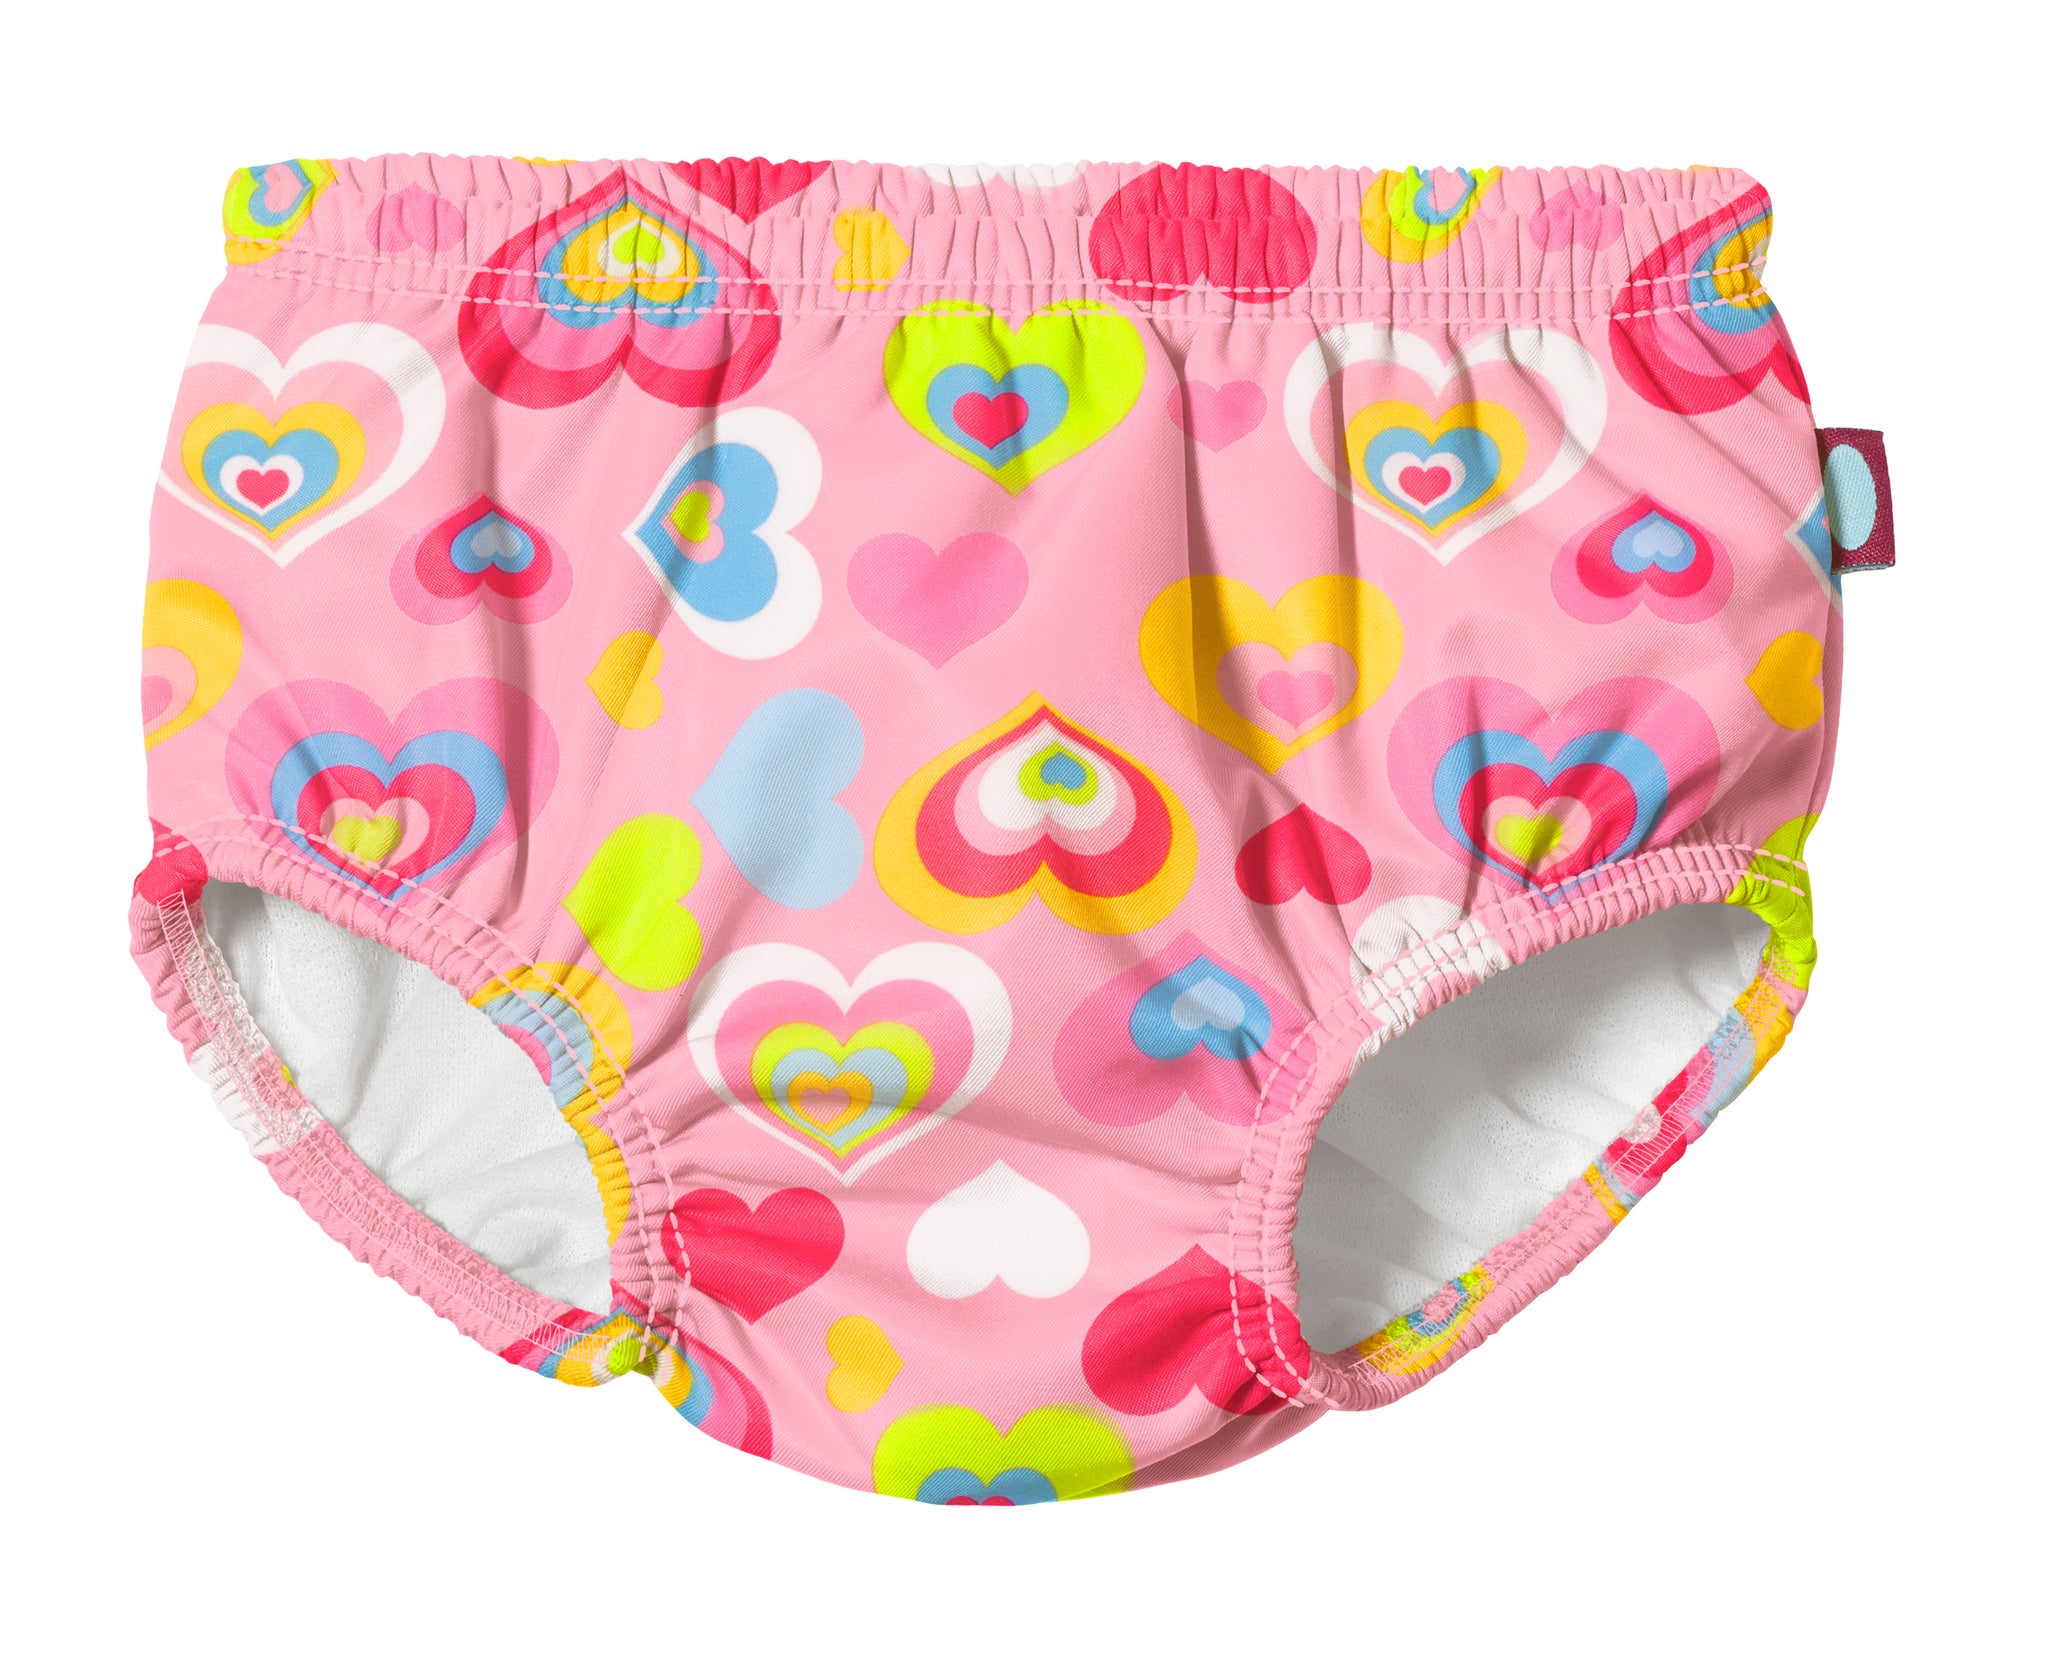 Boys and Girls Recycled Polyester UPF 50+ Swim Diaper Cover